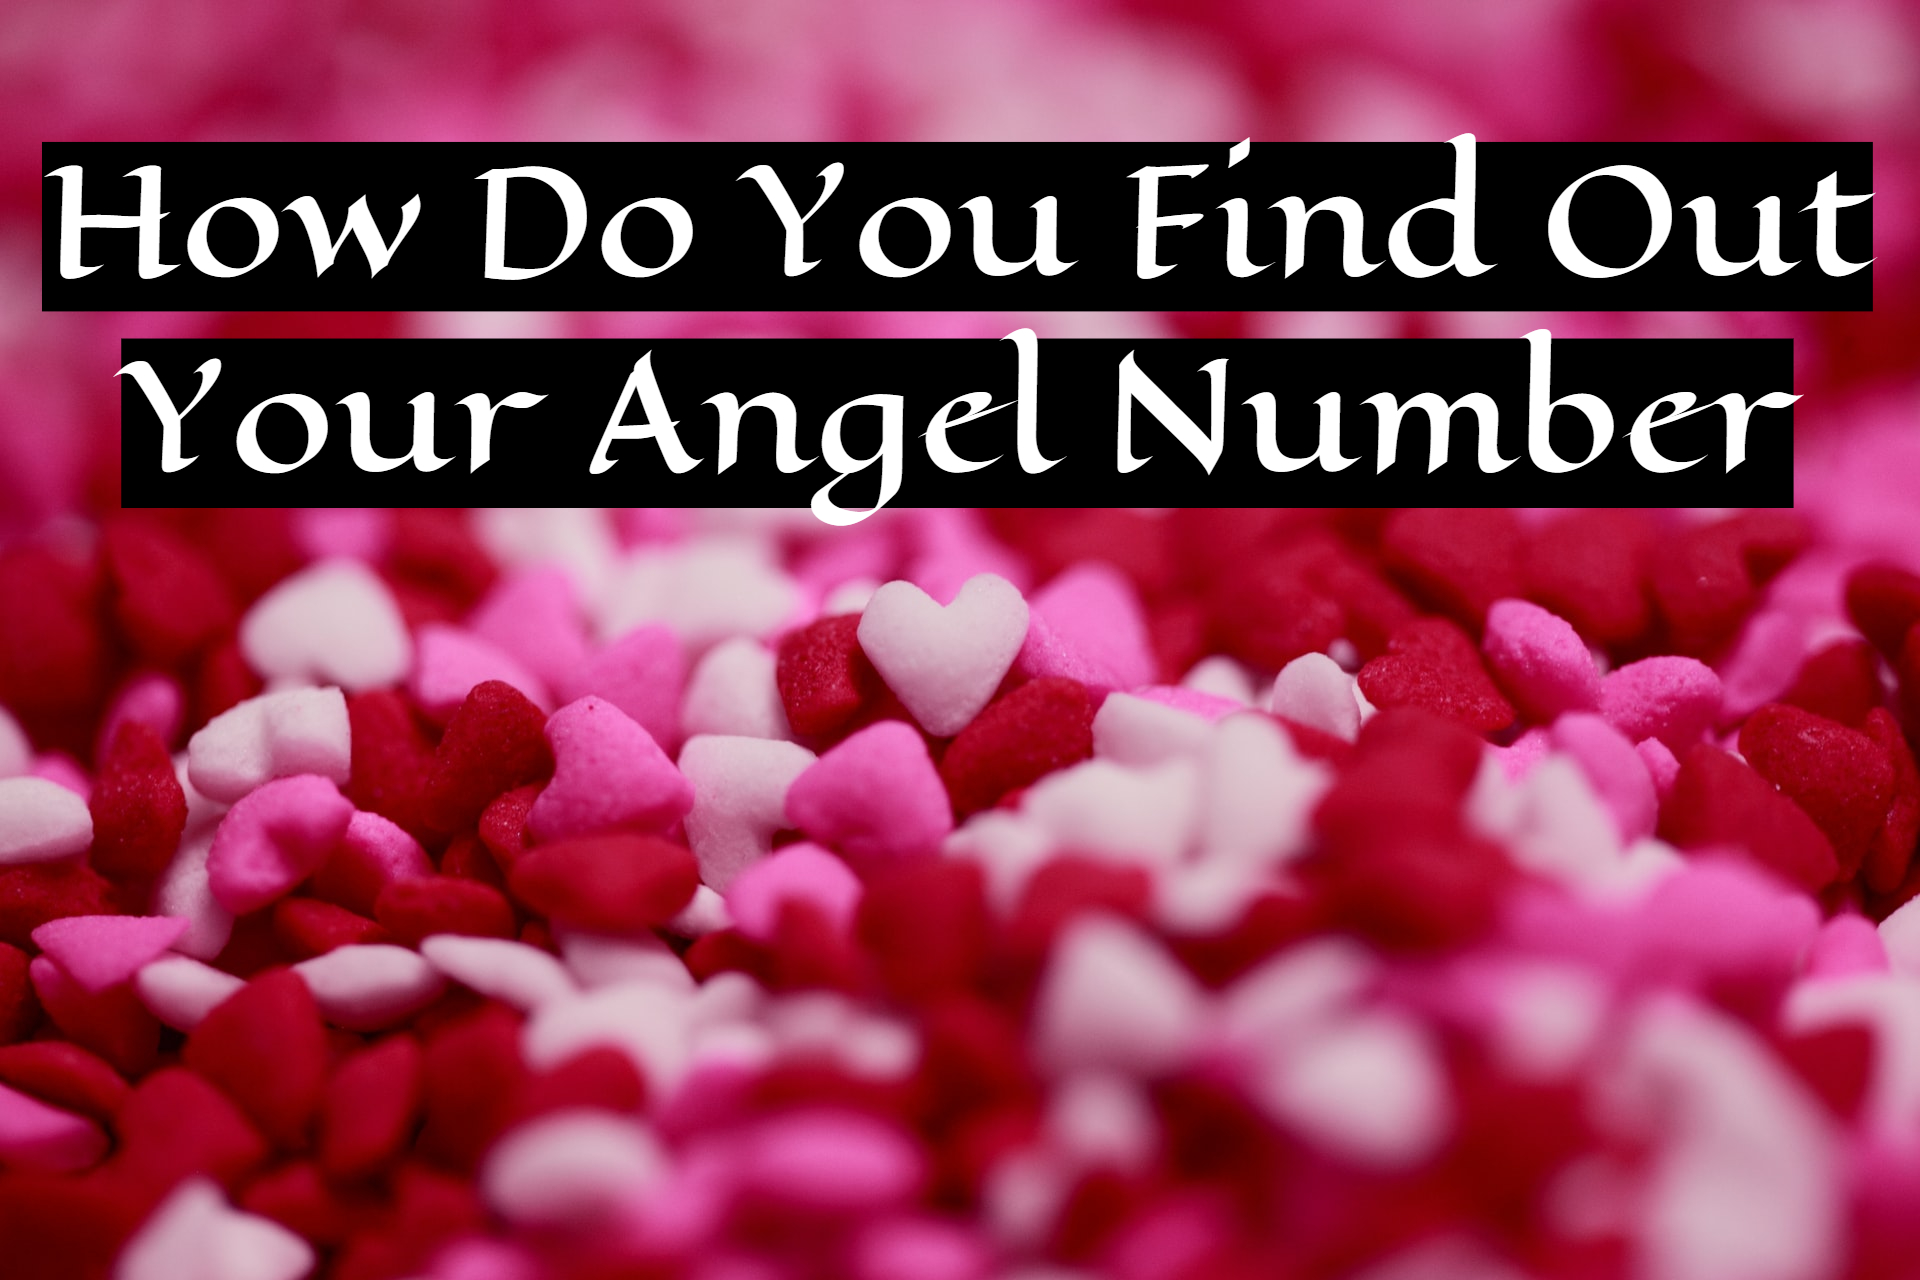 How Do You Find Out Your Angel Number?